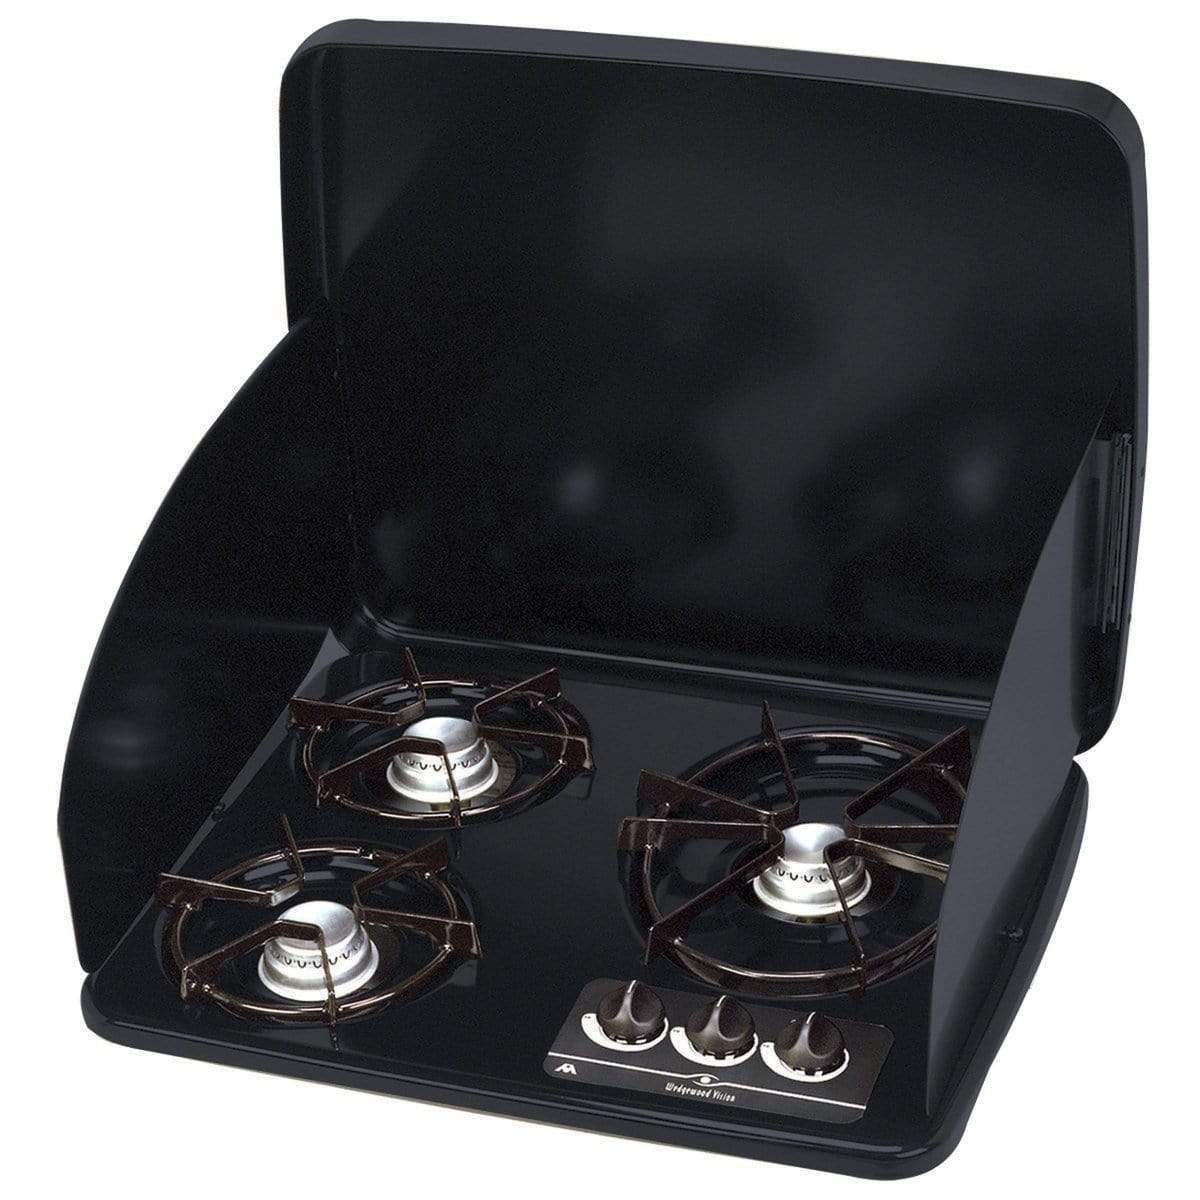 Atwood Mobile Products Qualifies for Free Shipping Atwood 2-Burner Cooktop Cover Black #56458